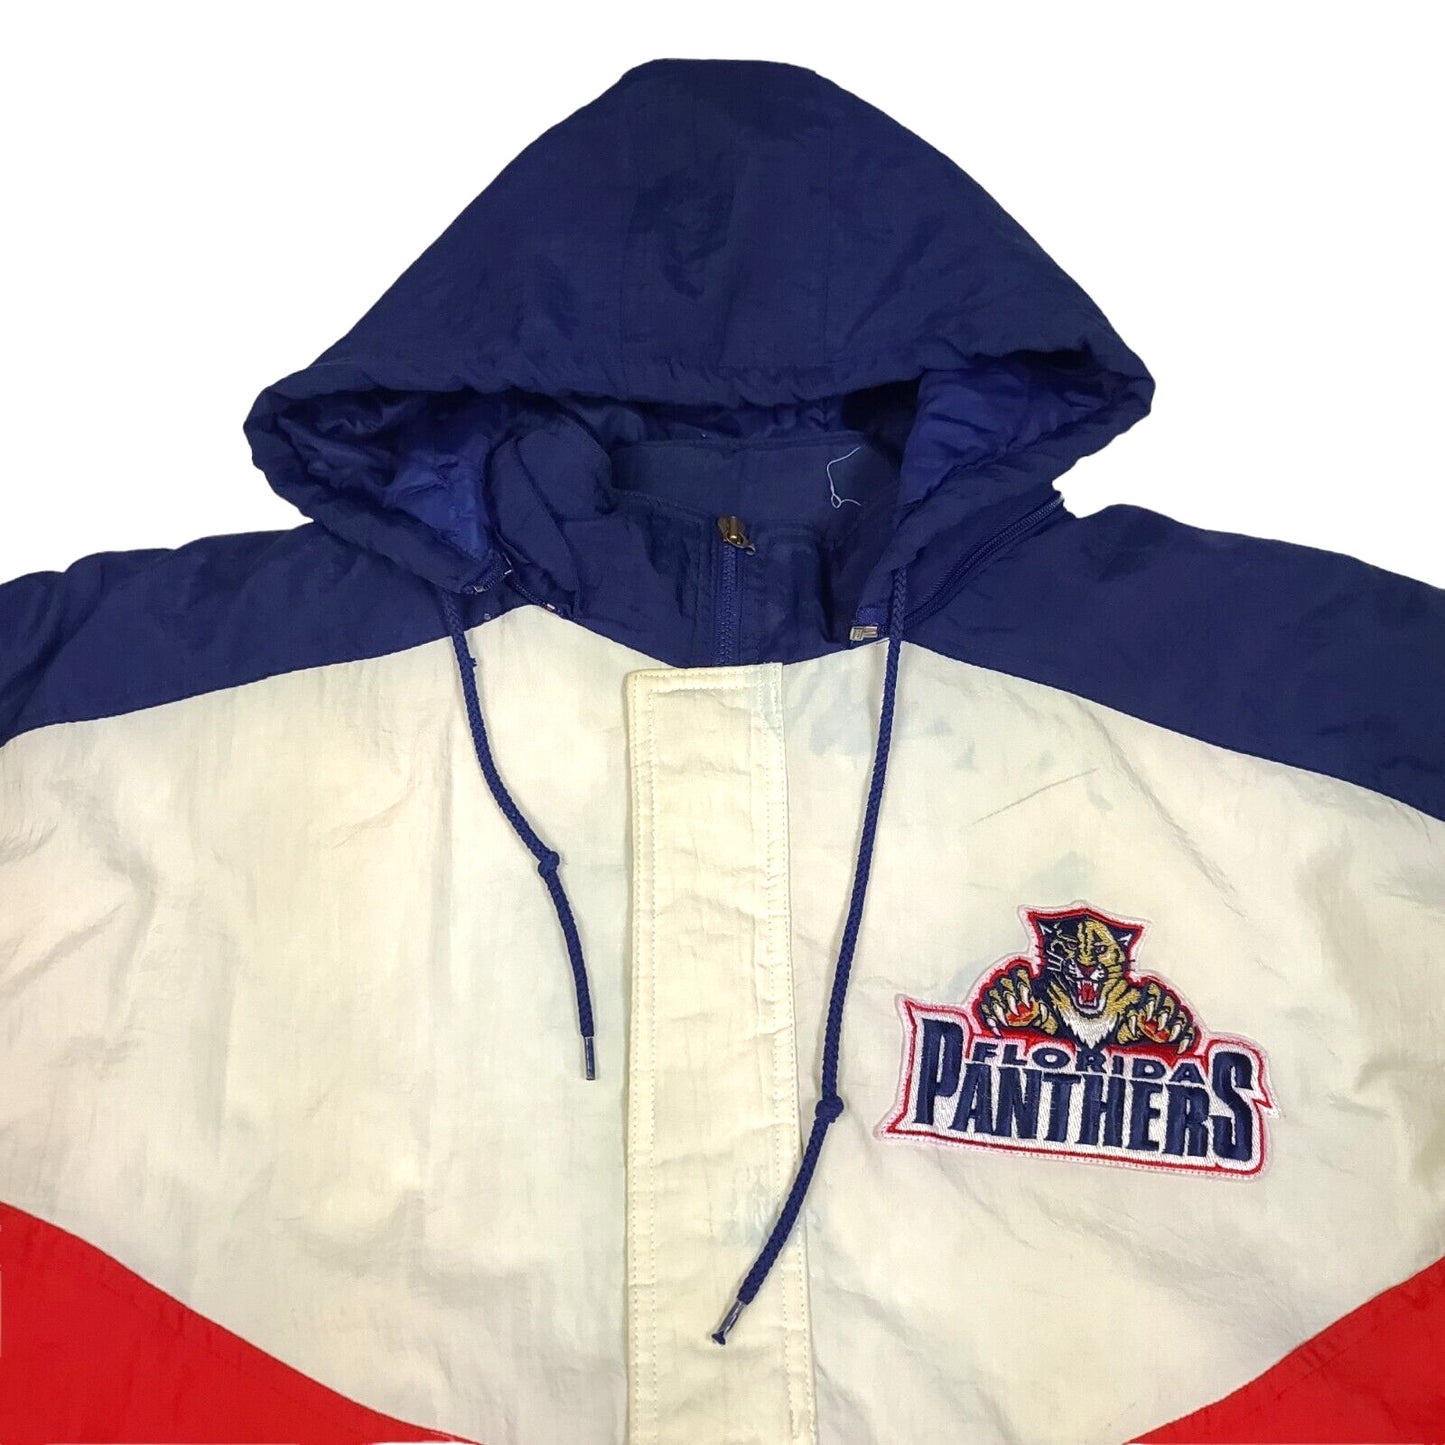 Florida Panthers Nhl Apex One Hooded Winter Jacket Coat